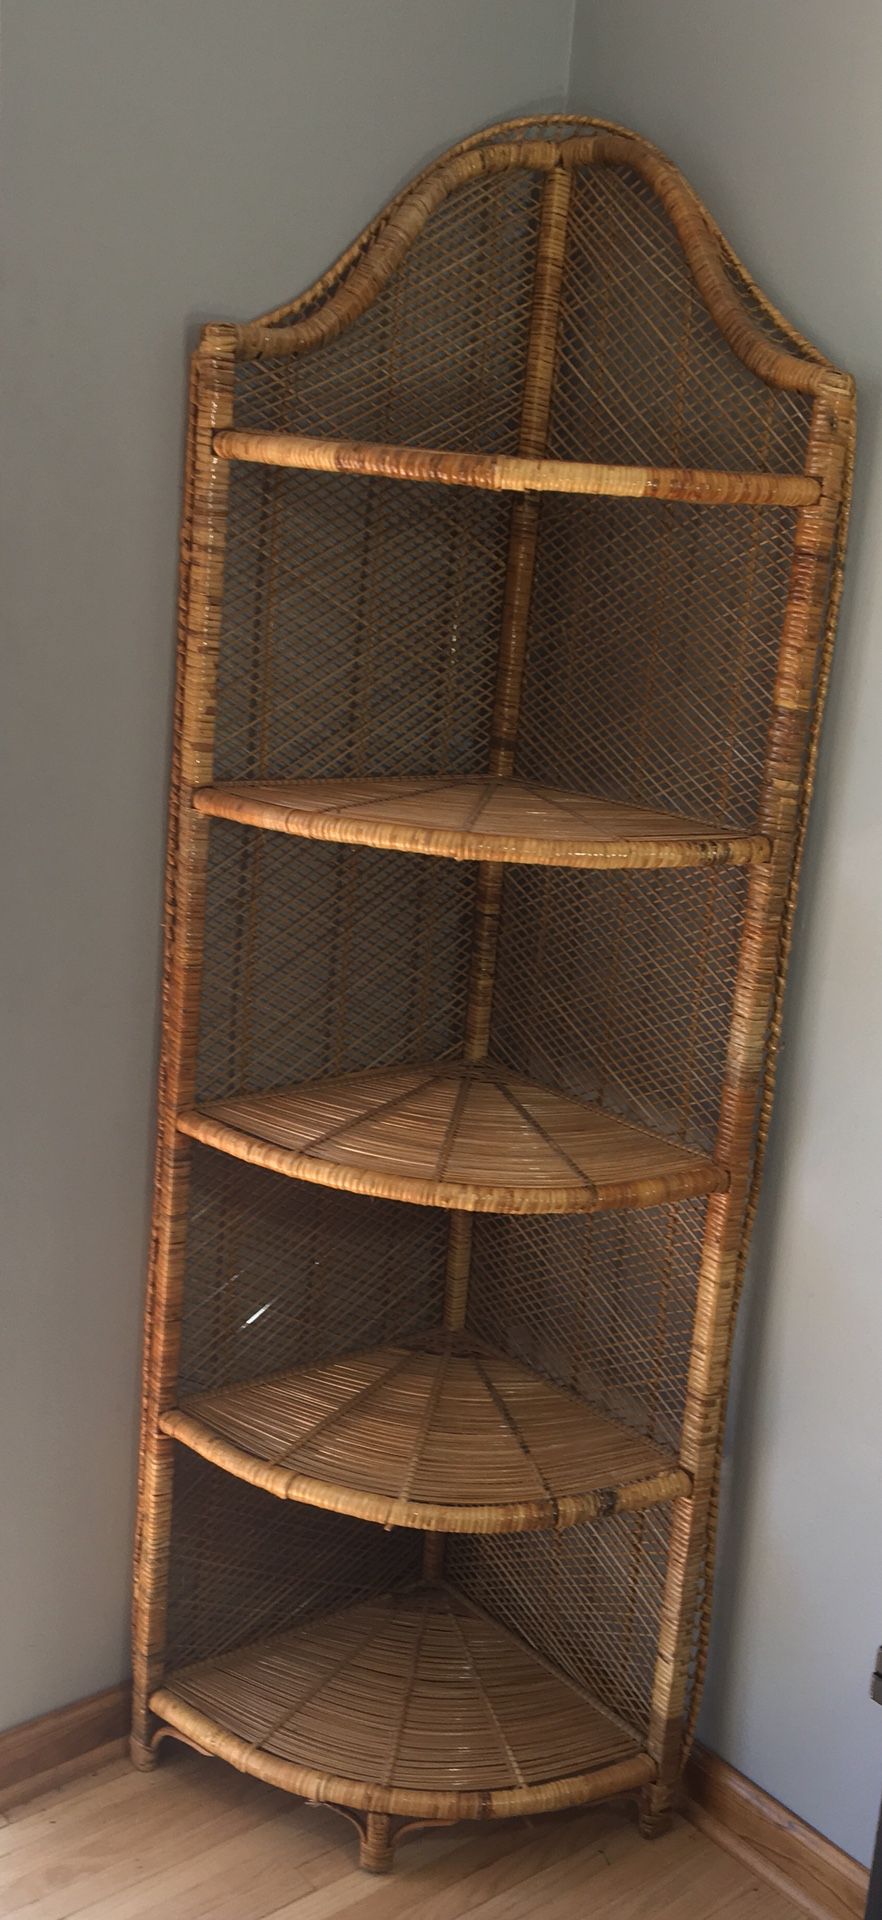 Tall corner wicker Rattan shelving unit like peacock style for Sale in